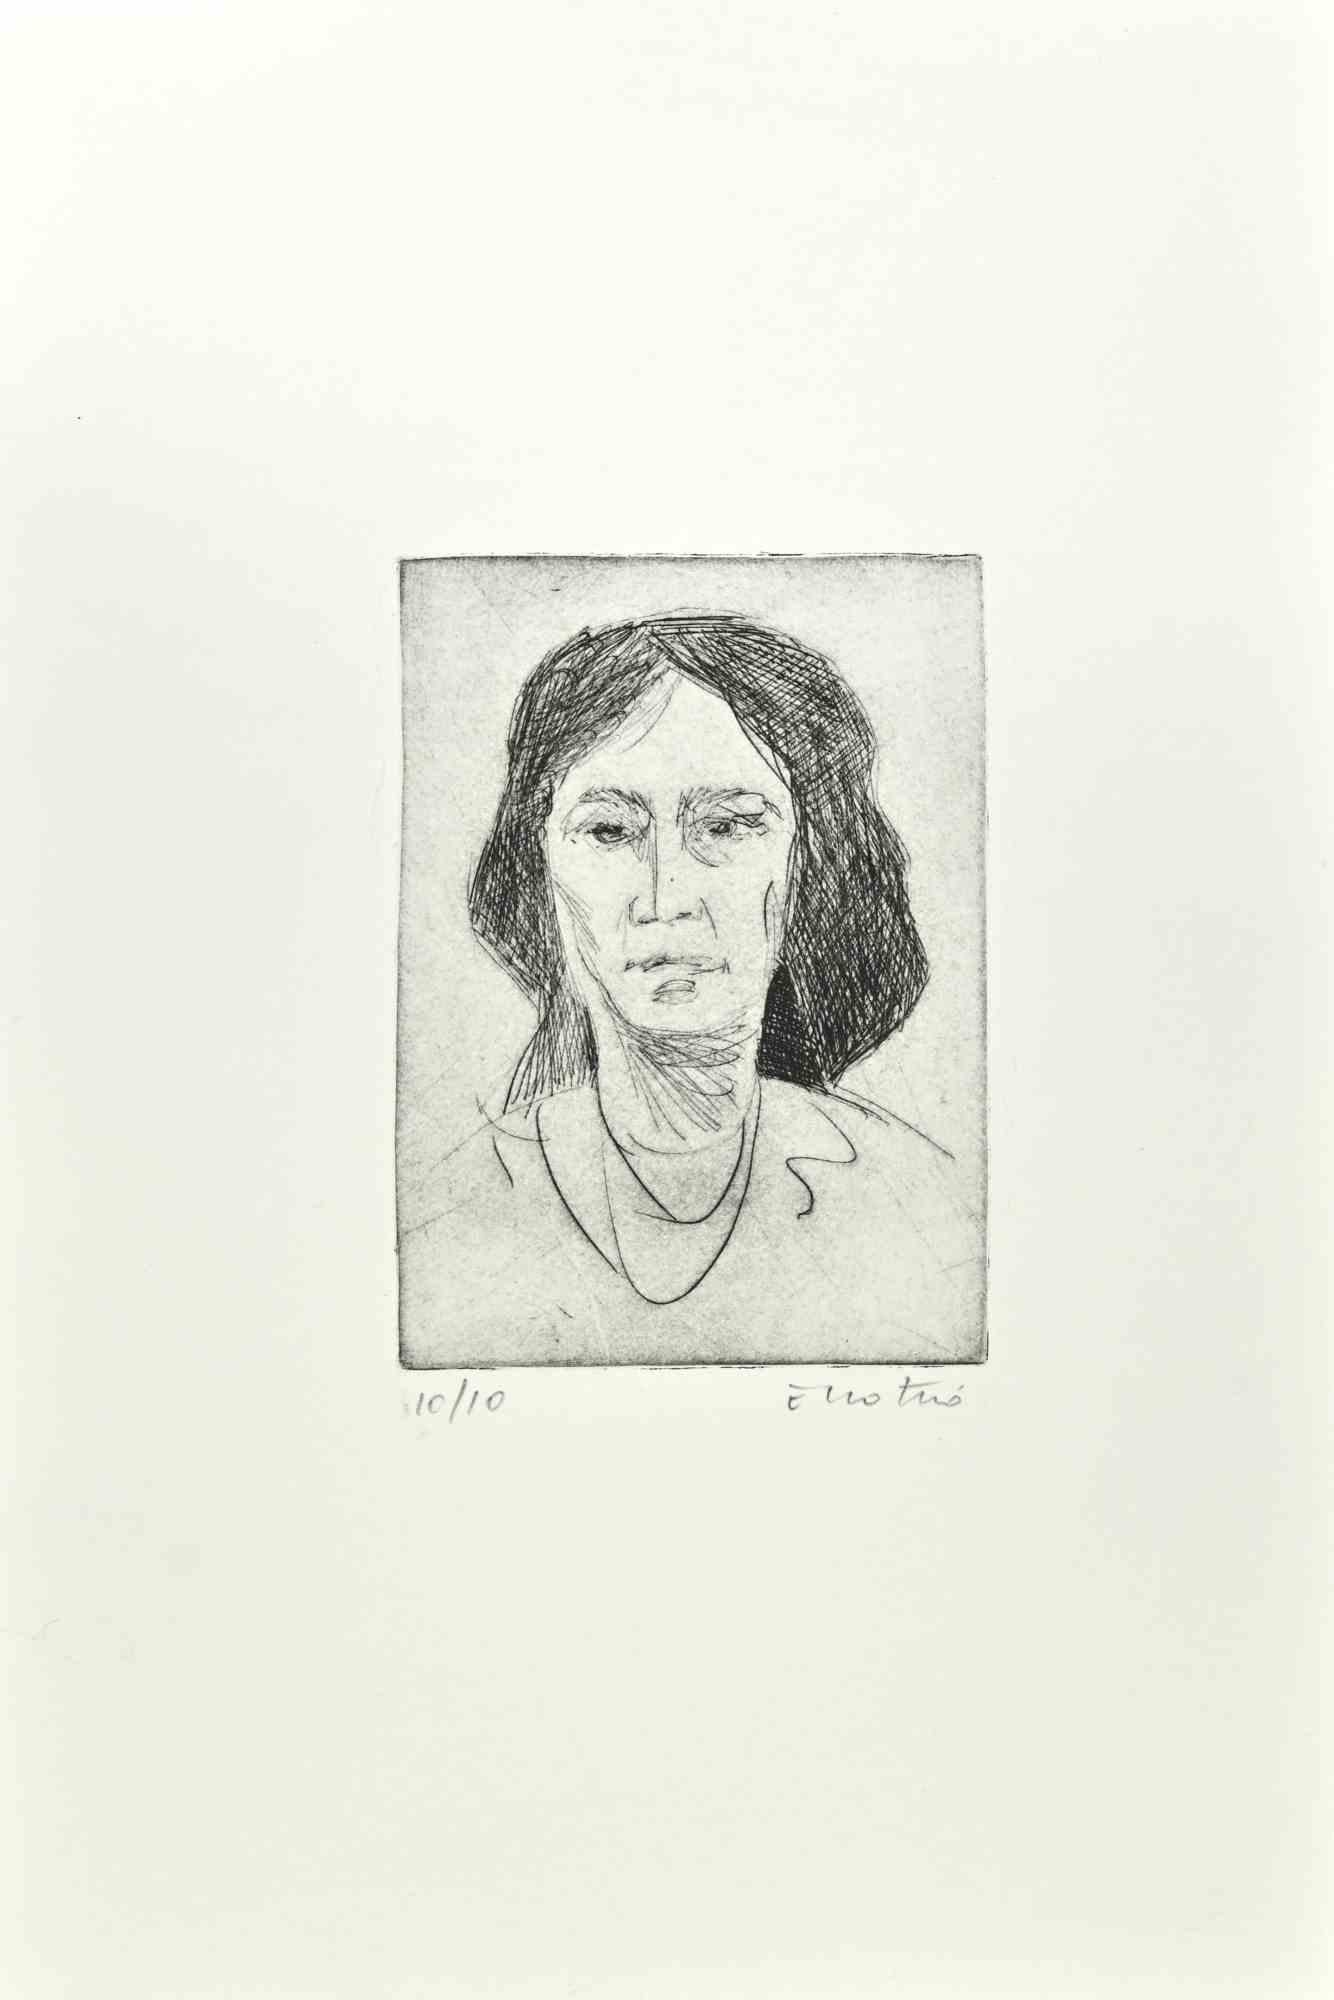 Woman is an Etching realized by Enotrio Pugliese in 1963.

Limited edition of 10 copies numbered and signed by the artist.

Good condition on a white cardboard.

Enotrio Pugliese (May 11, 1920 - August 1989) was an Italian painter. Born in Buenos